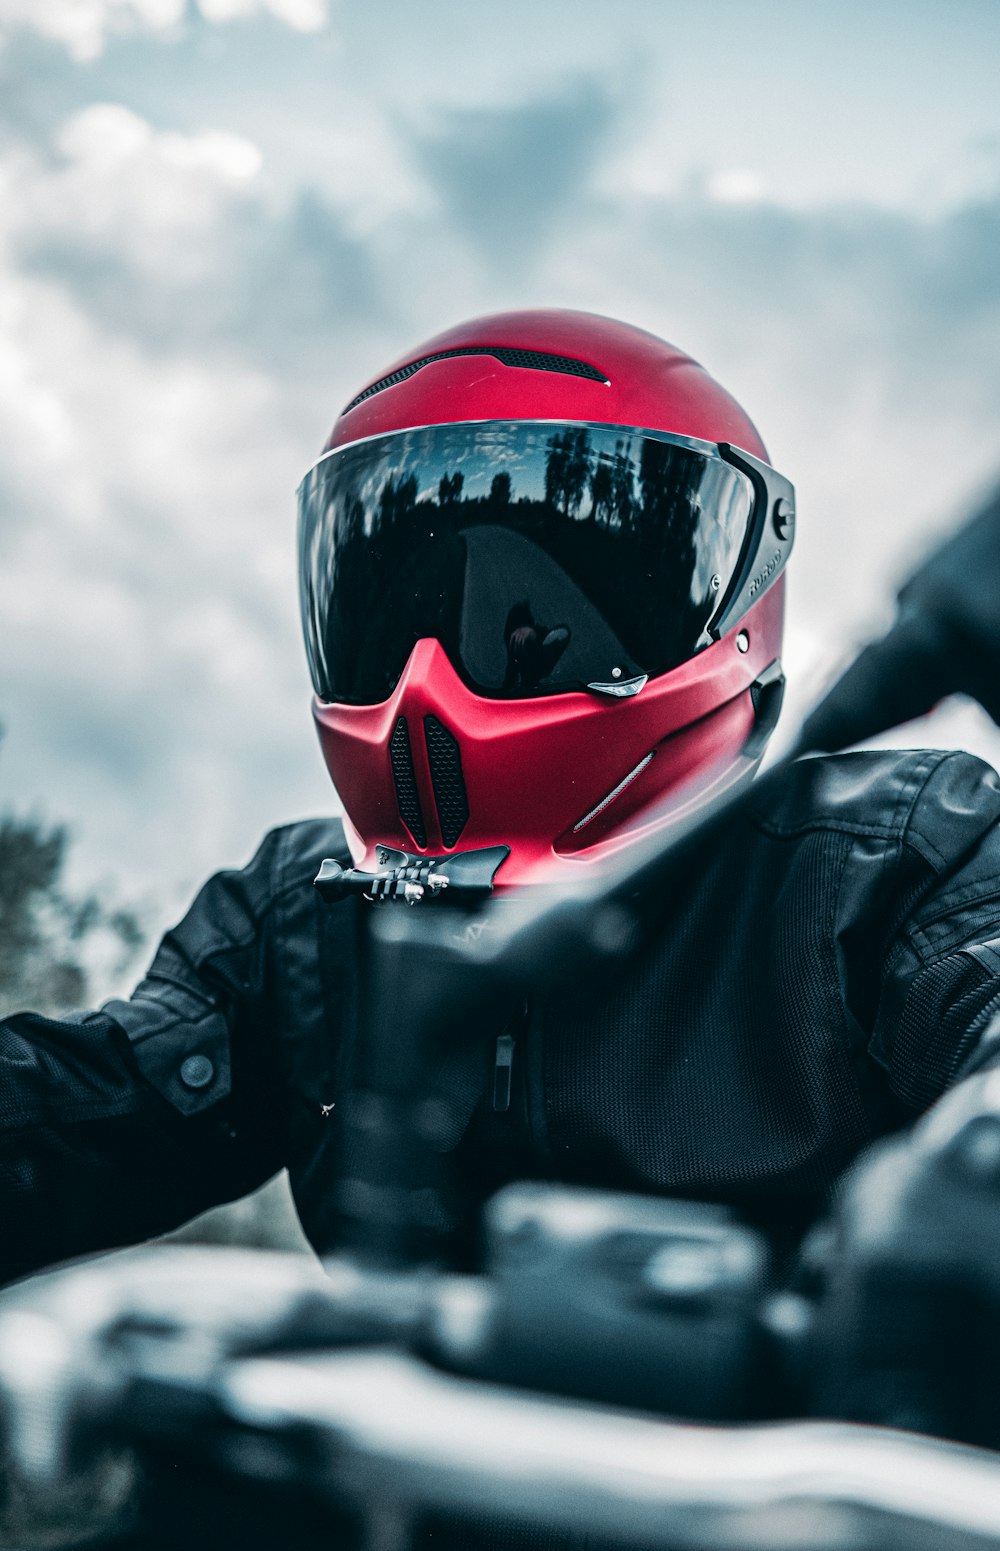 a person wearing a red helmet and black jacket sitting on a motorcycle